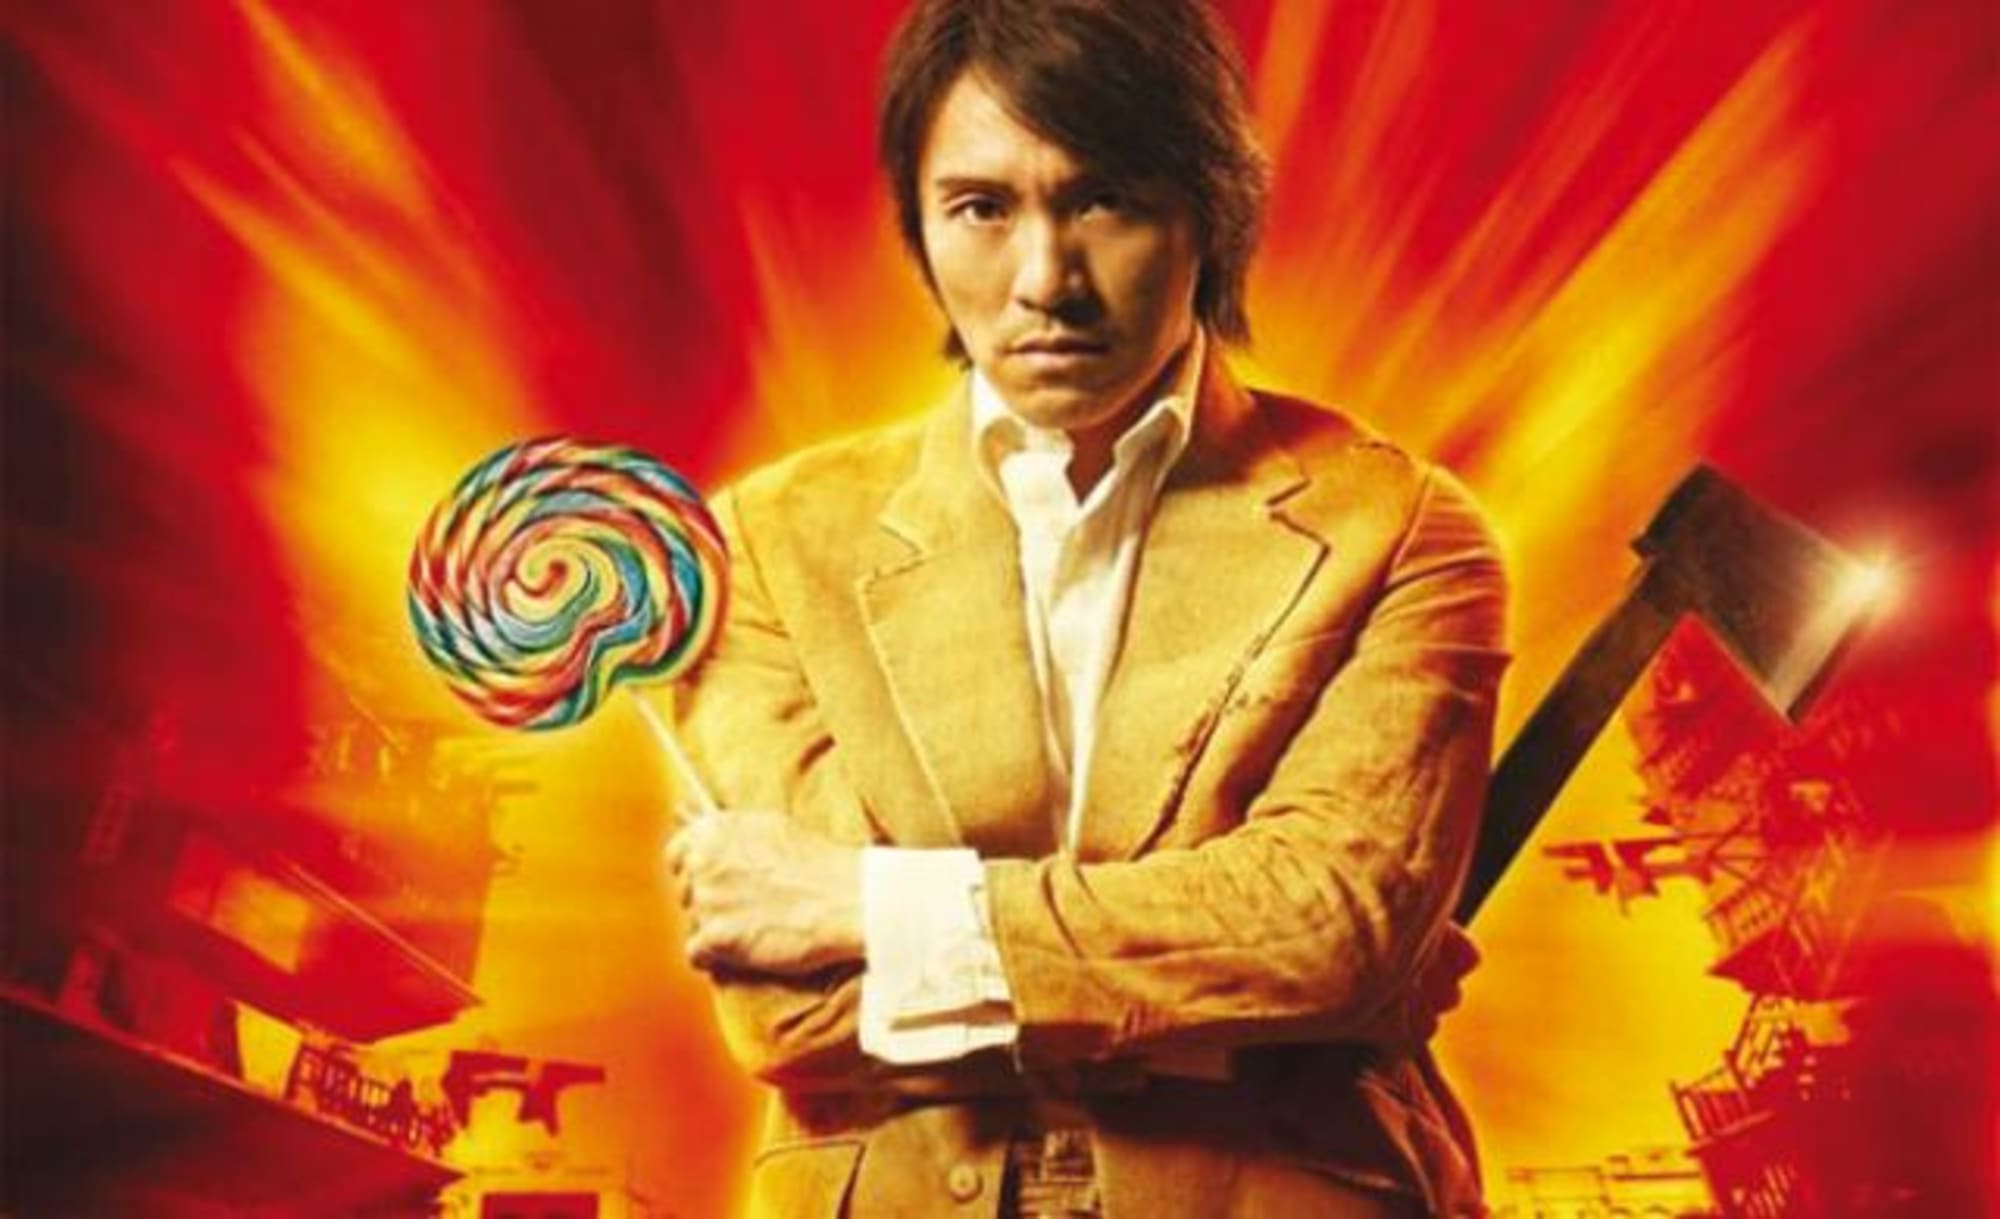 50 Best Comedy Movies on Netflix: Kung Fu Hustle